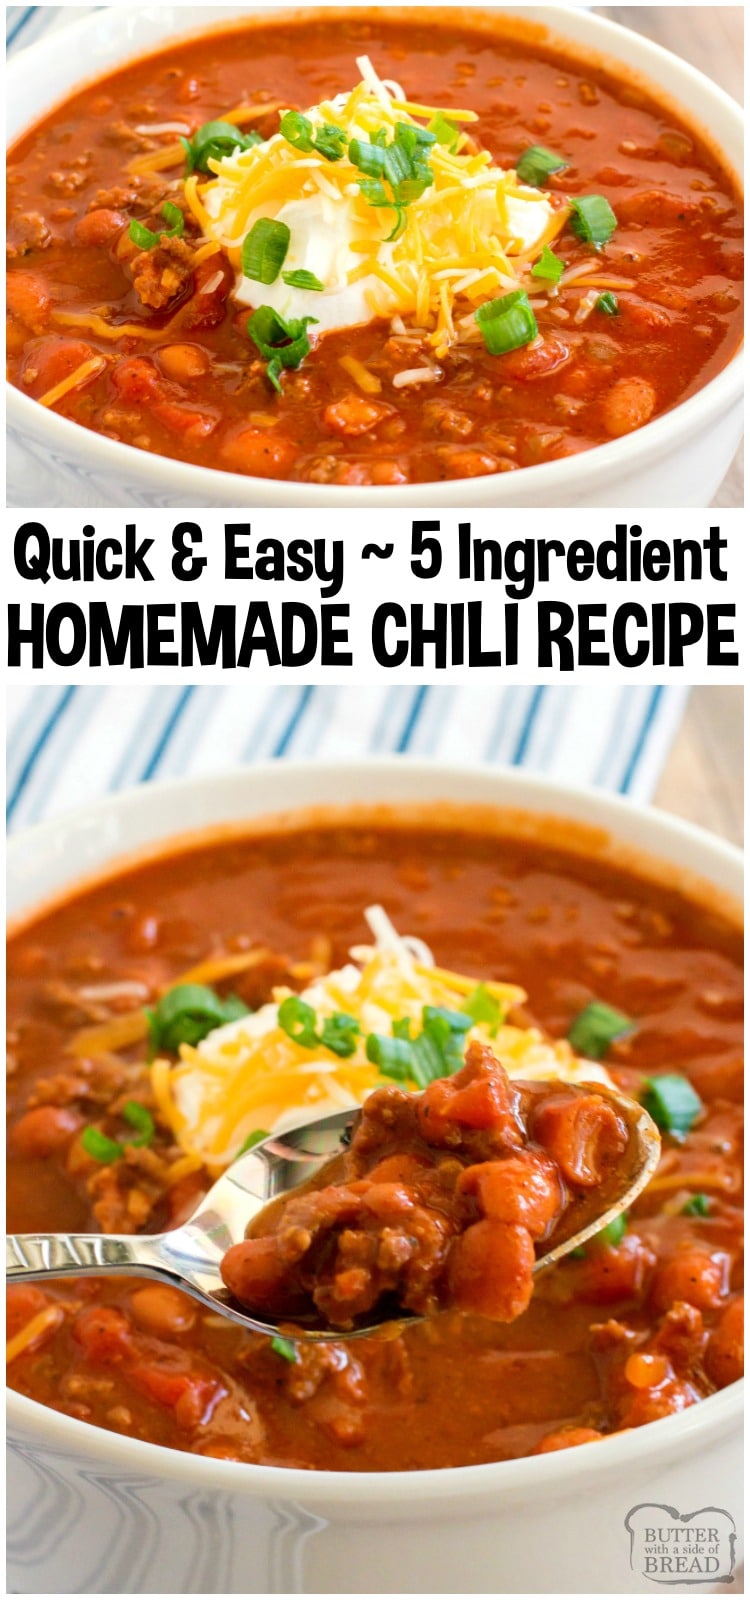 Easy Chili Recipe made in under an hour with just 5 ingredients! Simple & flavorful ground beef chili recipe that's perfect for family dinner. #chili #groundbeef #easychili #chilirecipe #cooking #dinner #easydinner from BUTTER WITH A SIDE OF BREAD